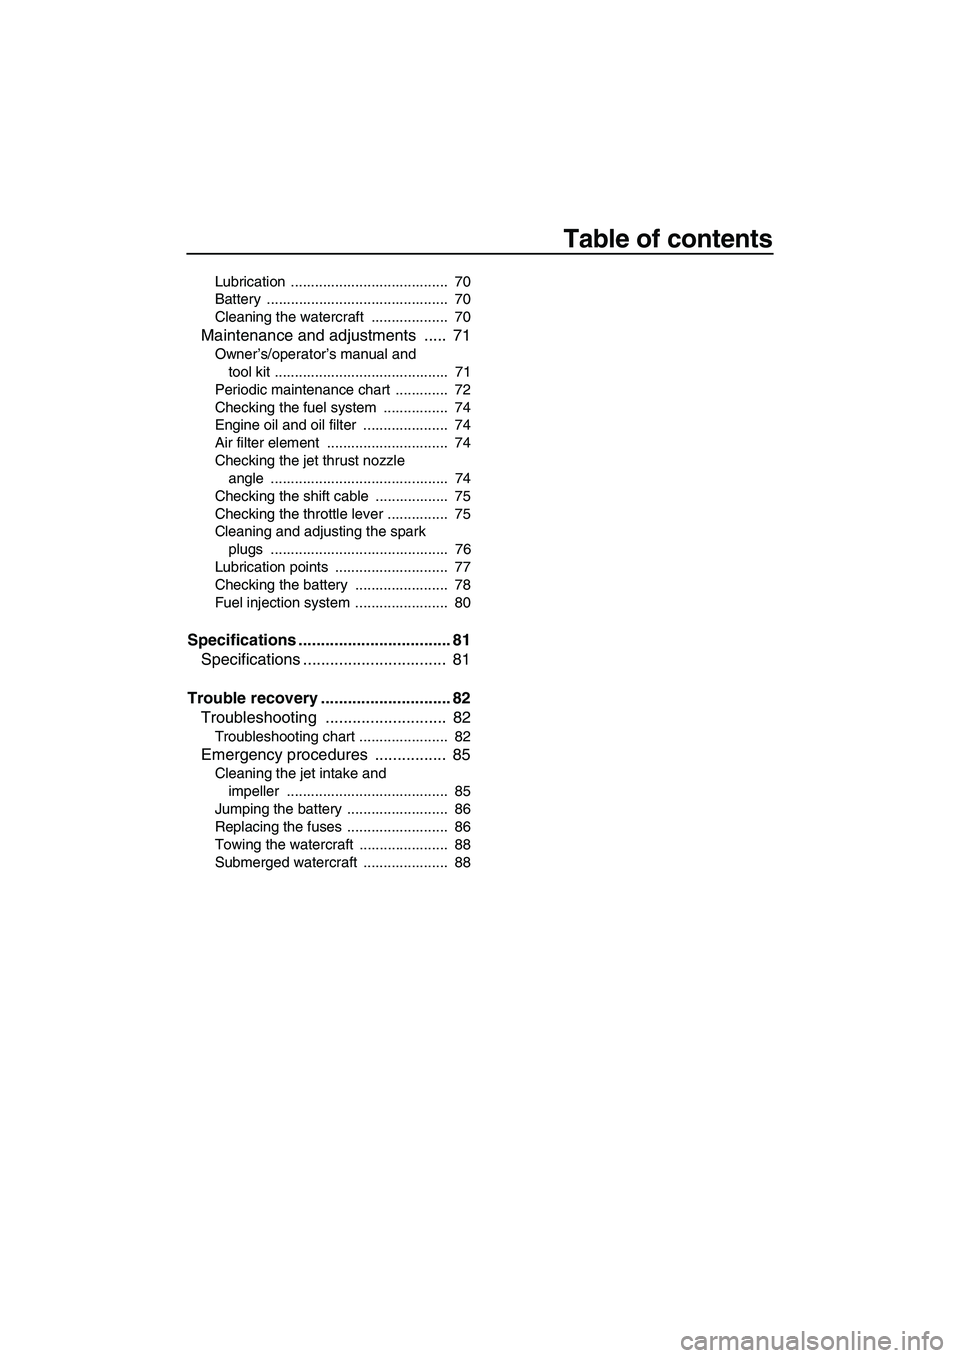 YAMAHA FZS 2009  Owners Manual Table of contents
Lubrication .......................................  70
Battery .............................................  70
Cleaning the watercraft  ...................  70
Maintenance and adj